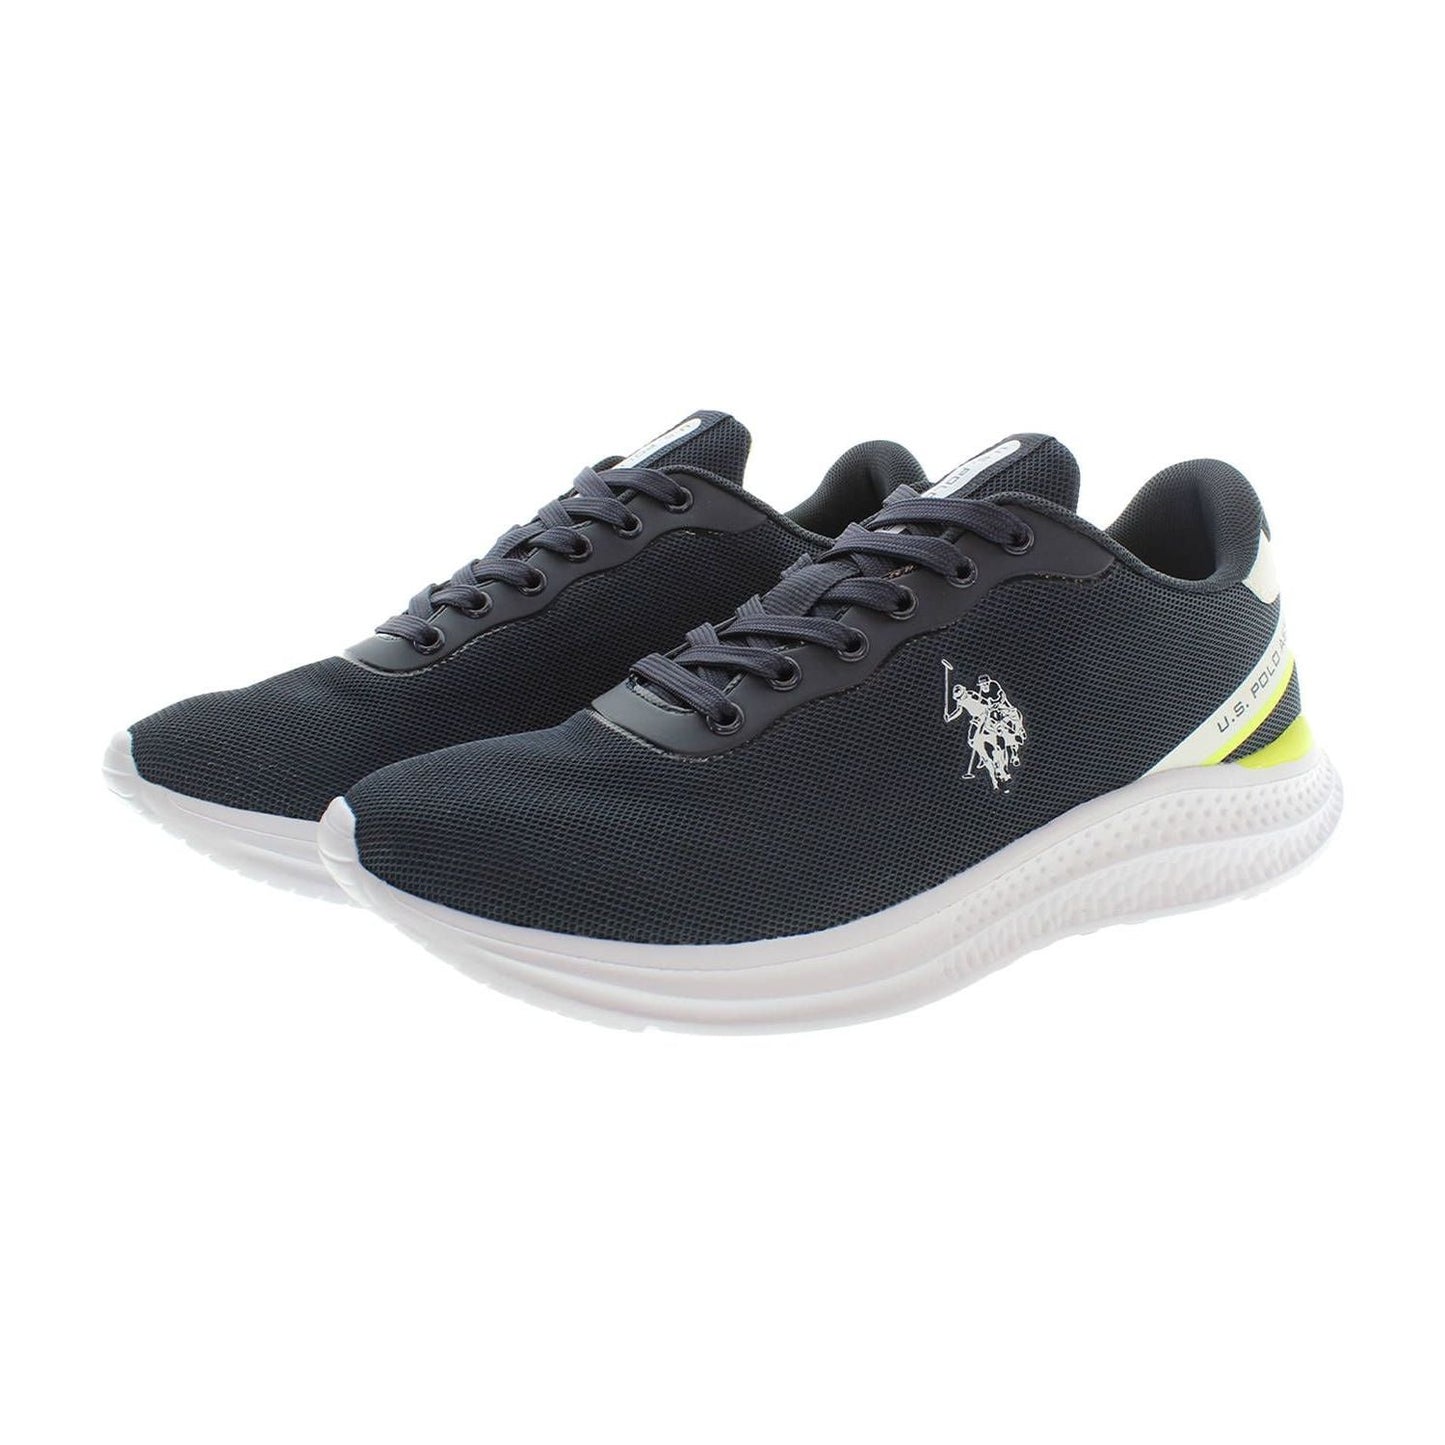 U.S. POLO ASSN.Elevated Blue Sneakers with Logo DetailMcRichard Designer Brands£89.00